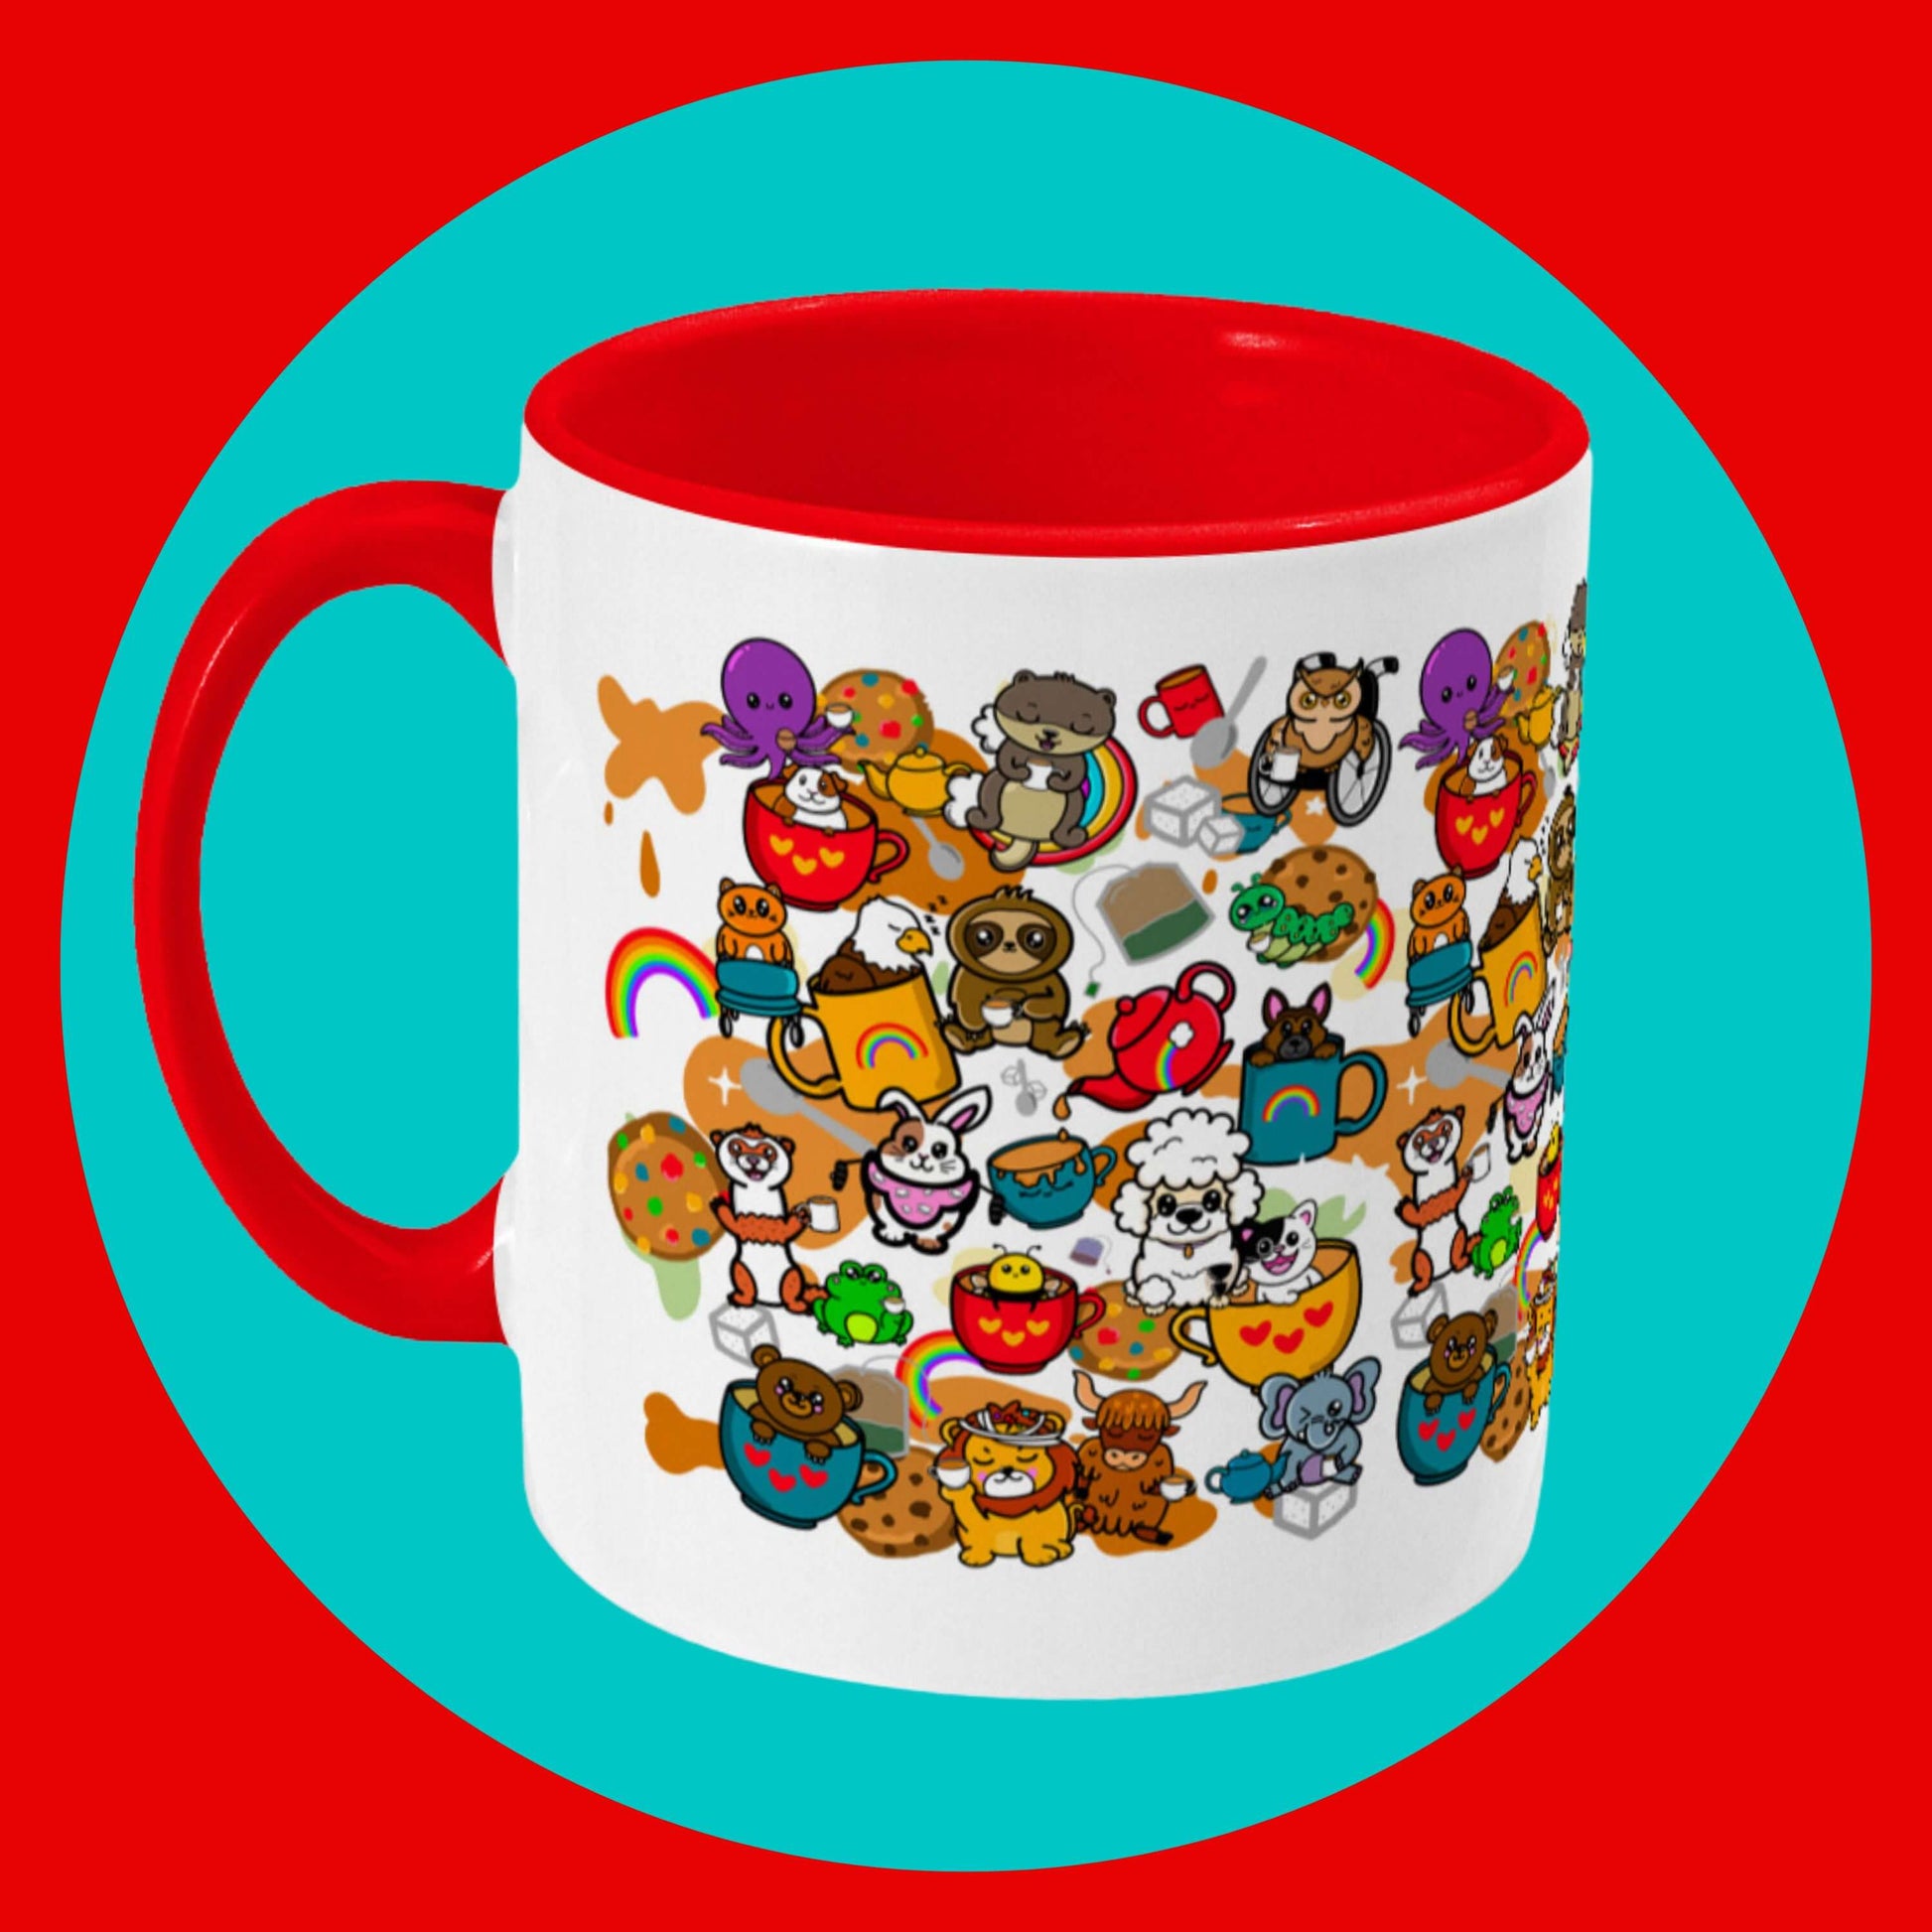 The Disabili Tea and Biscuits Ceramic Mug - Disability on a red and blue background. The white base mug has a red inside and handle with various disabled and chronically ill animal characters drinking tea, sitting in tea mugs and holding up mugs. There is also various cookie biscuits, tea bags, sugar cubes, teapots, rainbows, sparkles and tea spills all underneath. The mug is a punny gift raising awareness for disabilities.